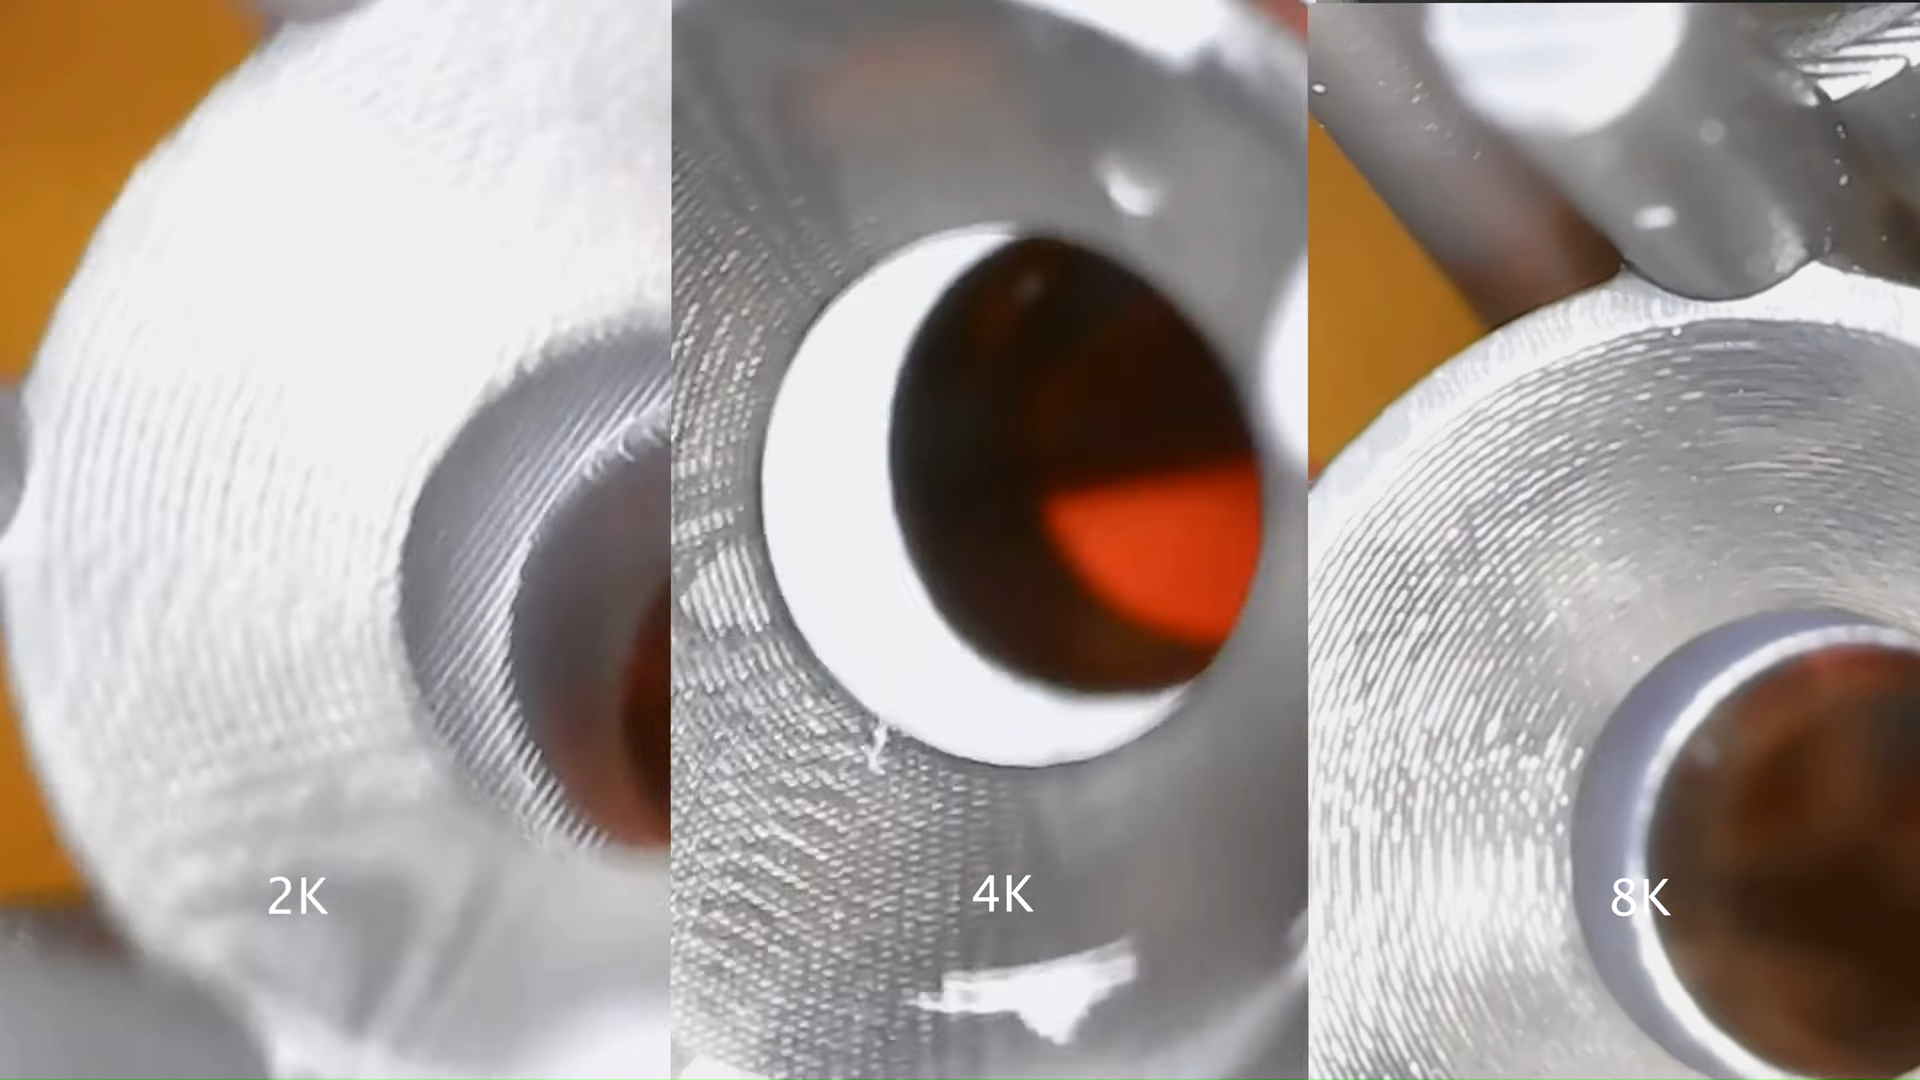 Comparing 2K, 4K, and 8K prints